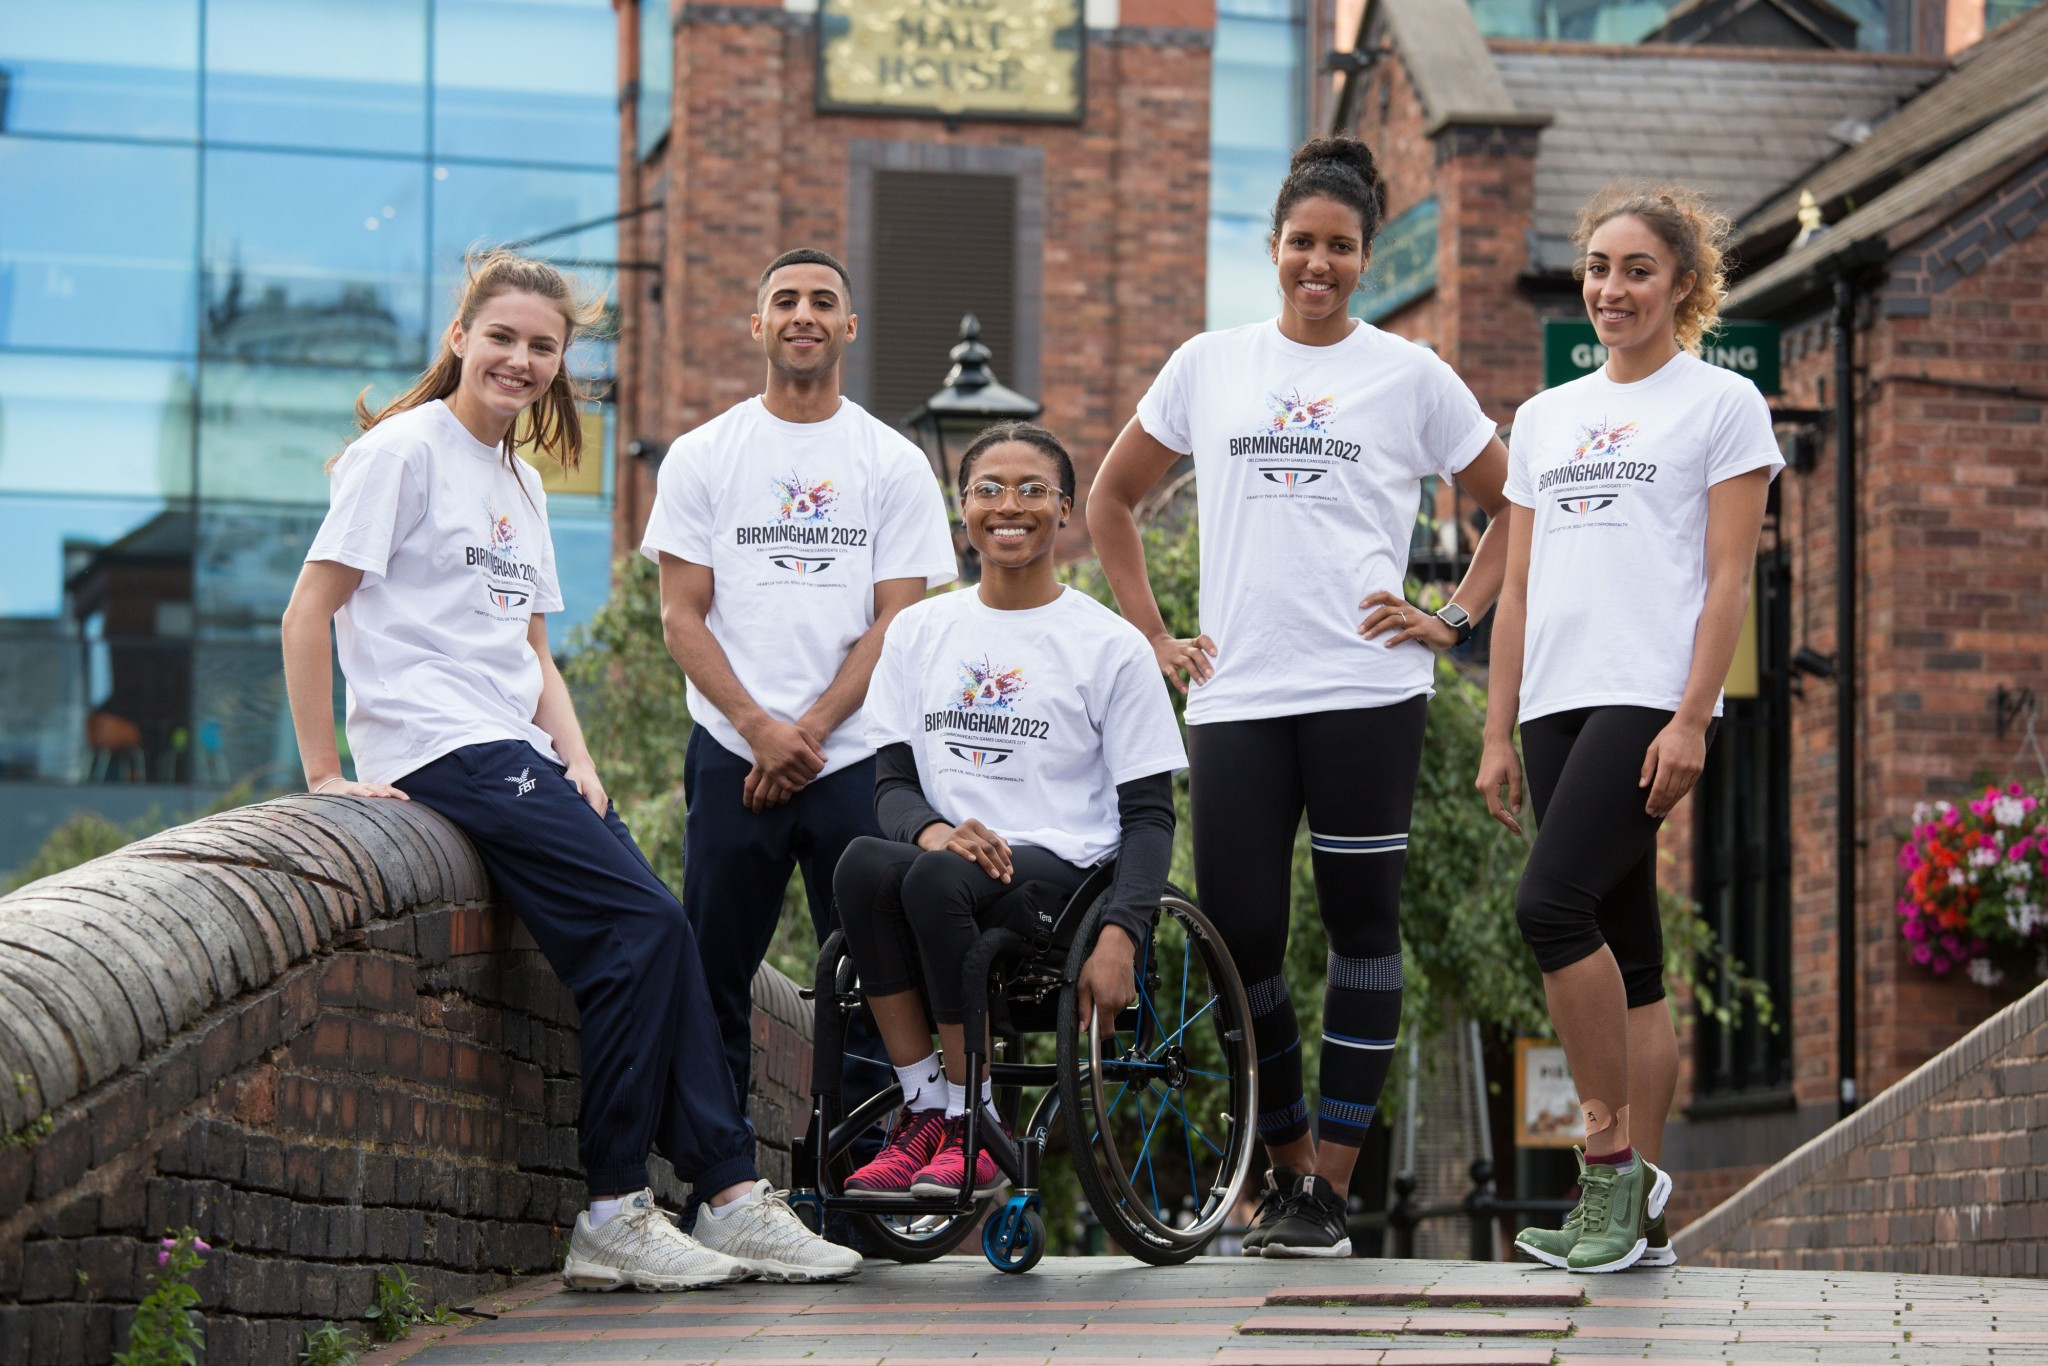 Five young Midlands athletes have pledged their support to Birmingham’s bid for the 2022 Commonwealth Games ©Birmingham 2022